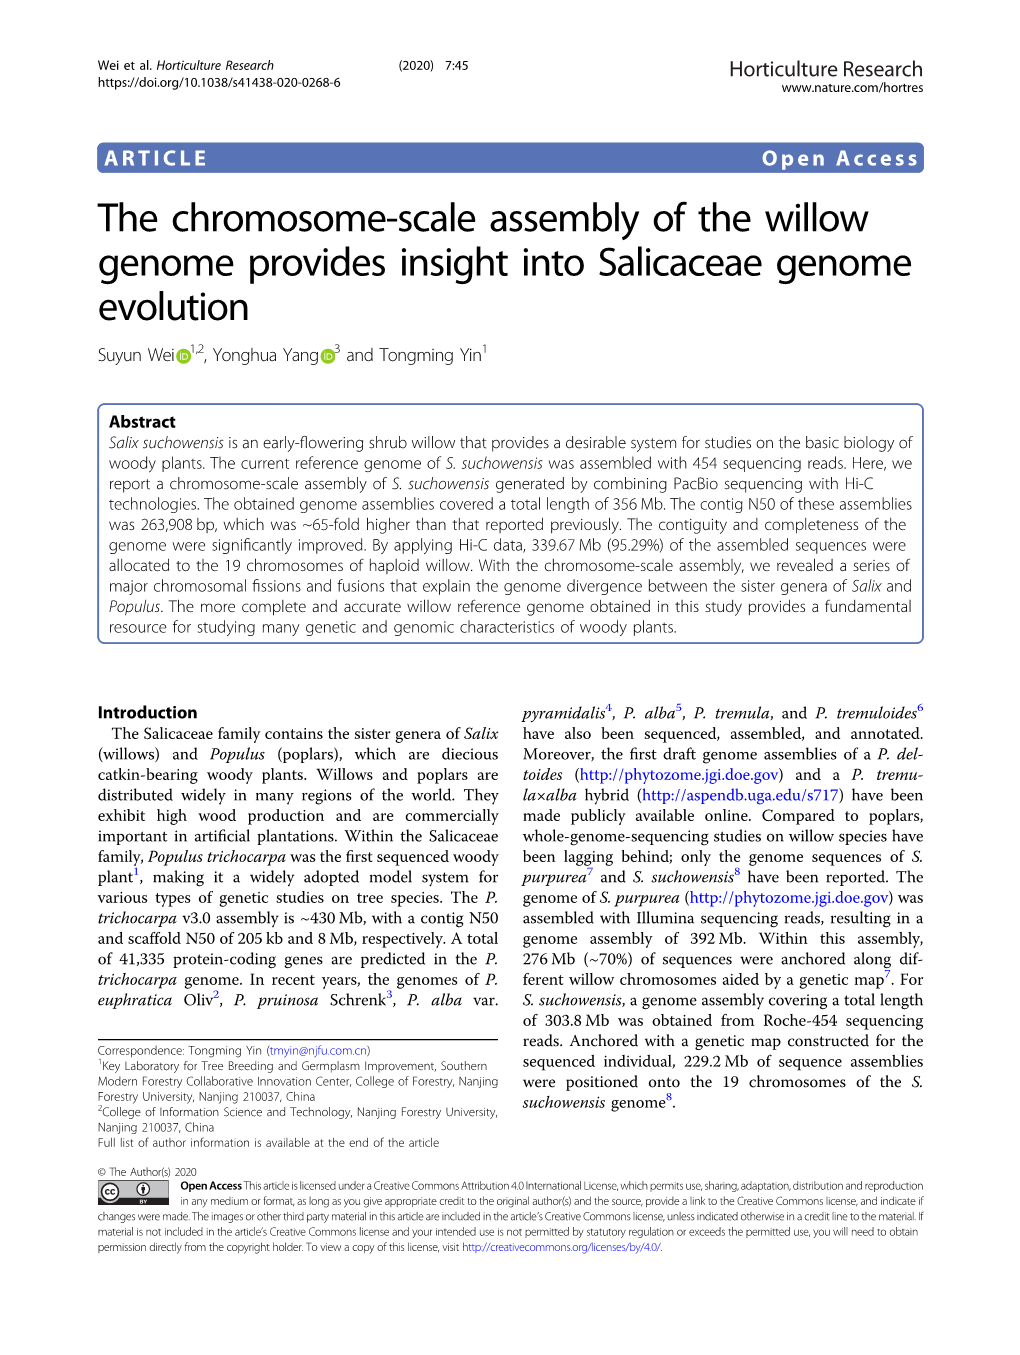 The Chromosome-Scale Assembly of the Willow Genome Provides Insight Into Salicaceae Genome Evolution Suyun Wei 1,2, Yonghua Yang 3 Andtongmingyin1